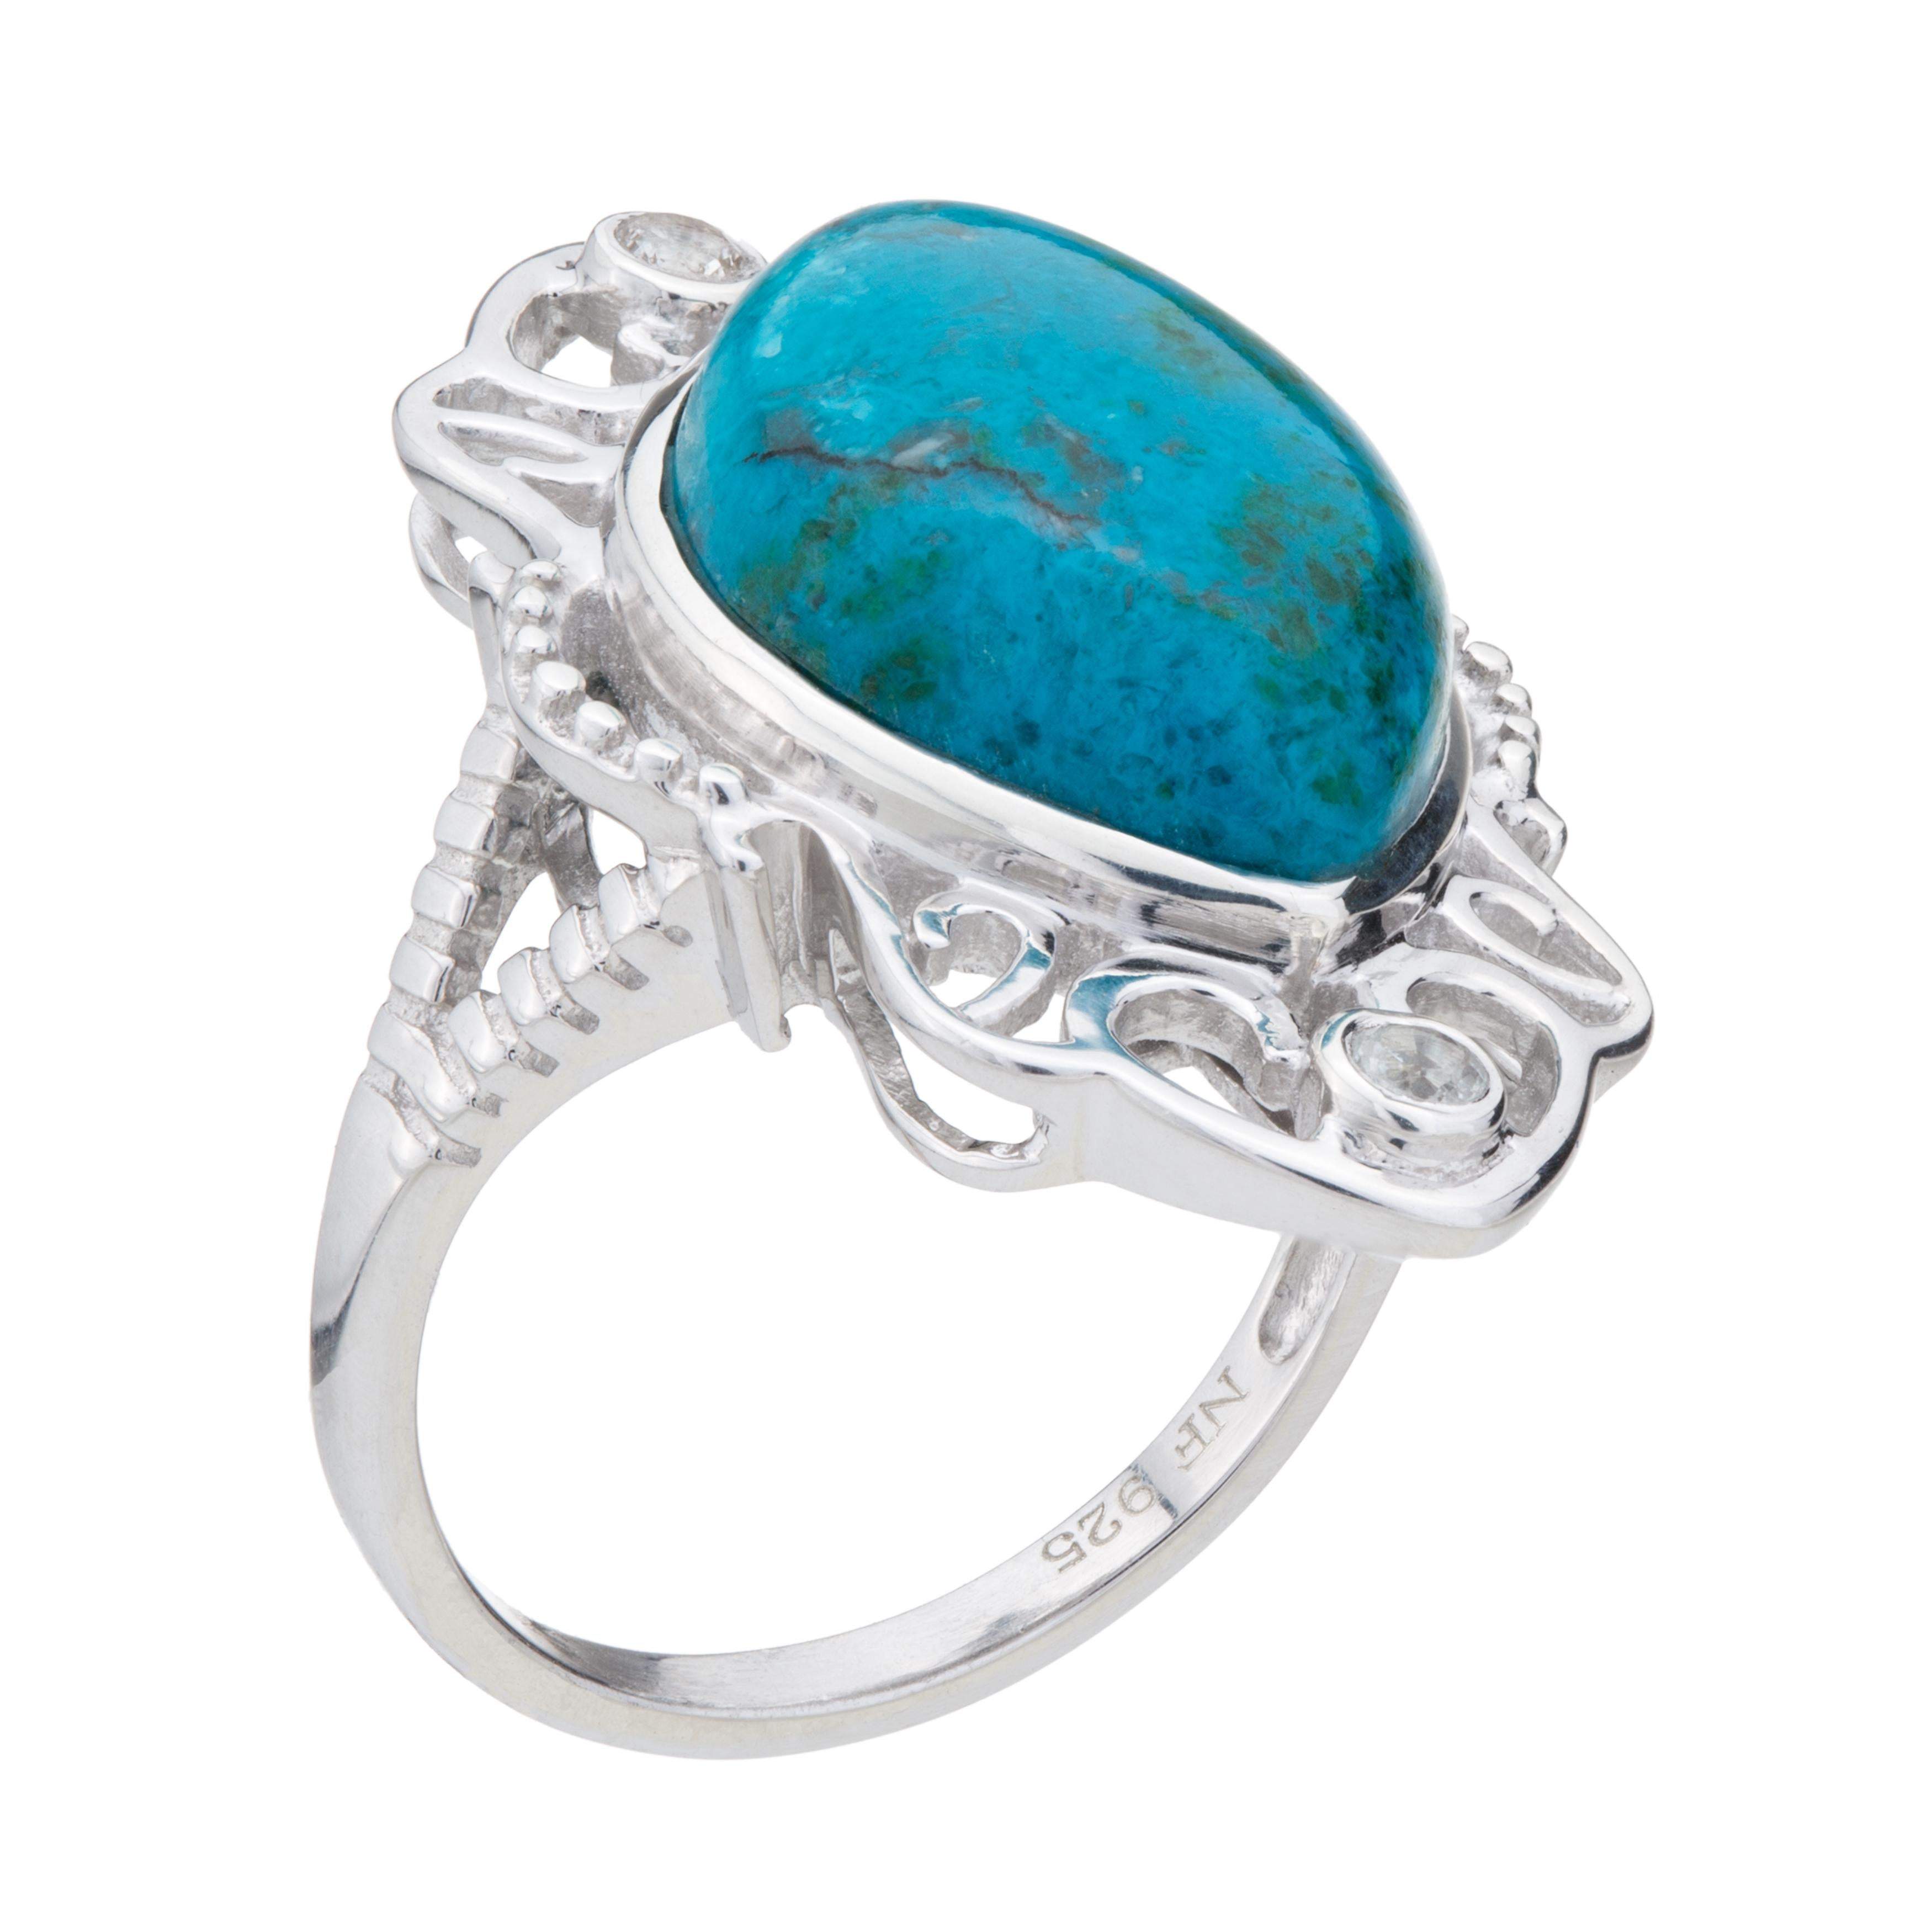 Sterling Silver Marquise Chrysocolla & Topaz Ring-Size 10 - Shop Thrifty Treasures